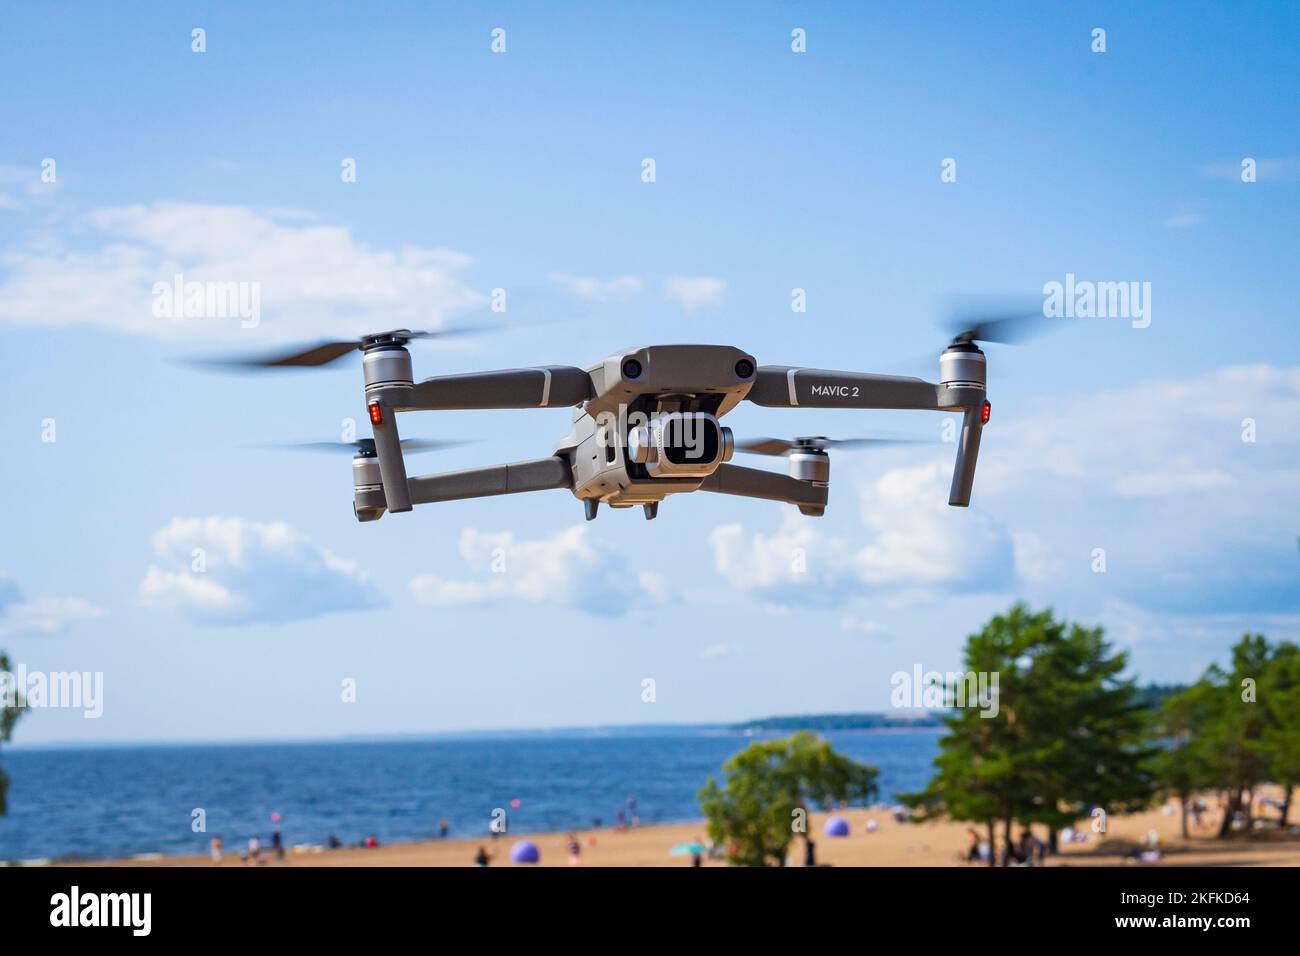 Sankt-Petersburg, Russia 10 August 2019: DJI Mavic 2 pro hovering in nature on the seashore over the beach and blue sky with hasselblad camera Stock Photo